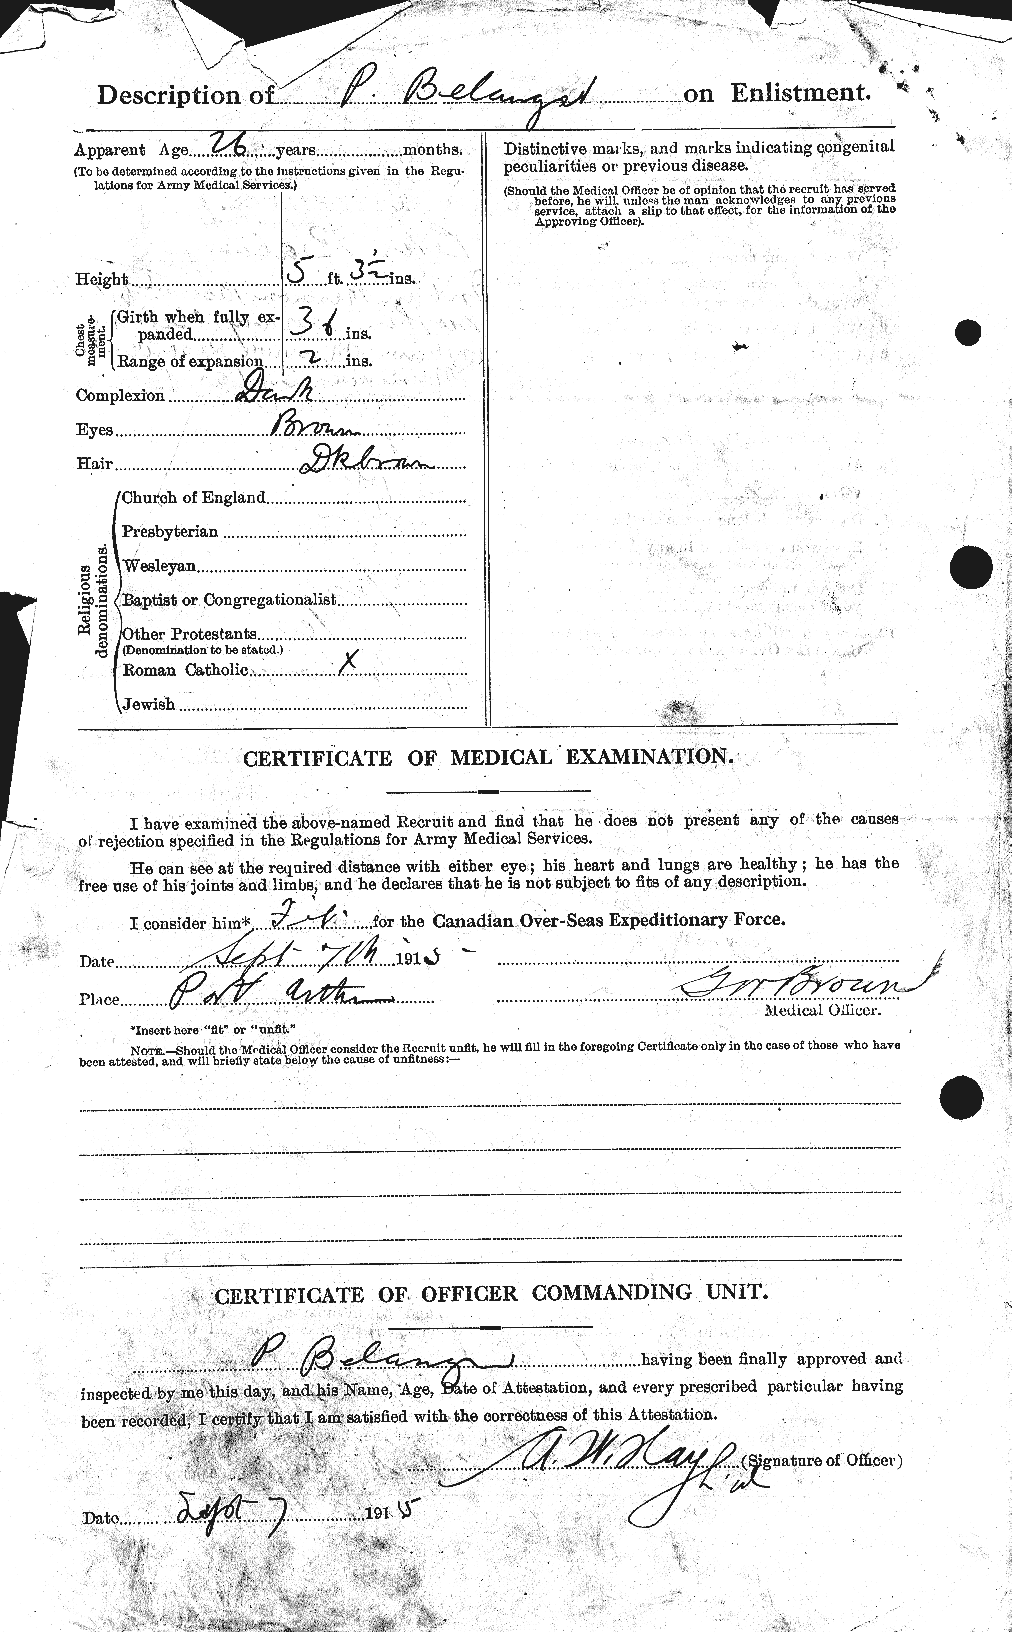 Personnel Records of the First World War - CEF 232673b